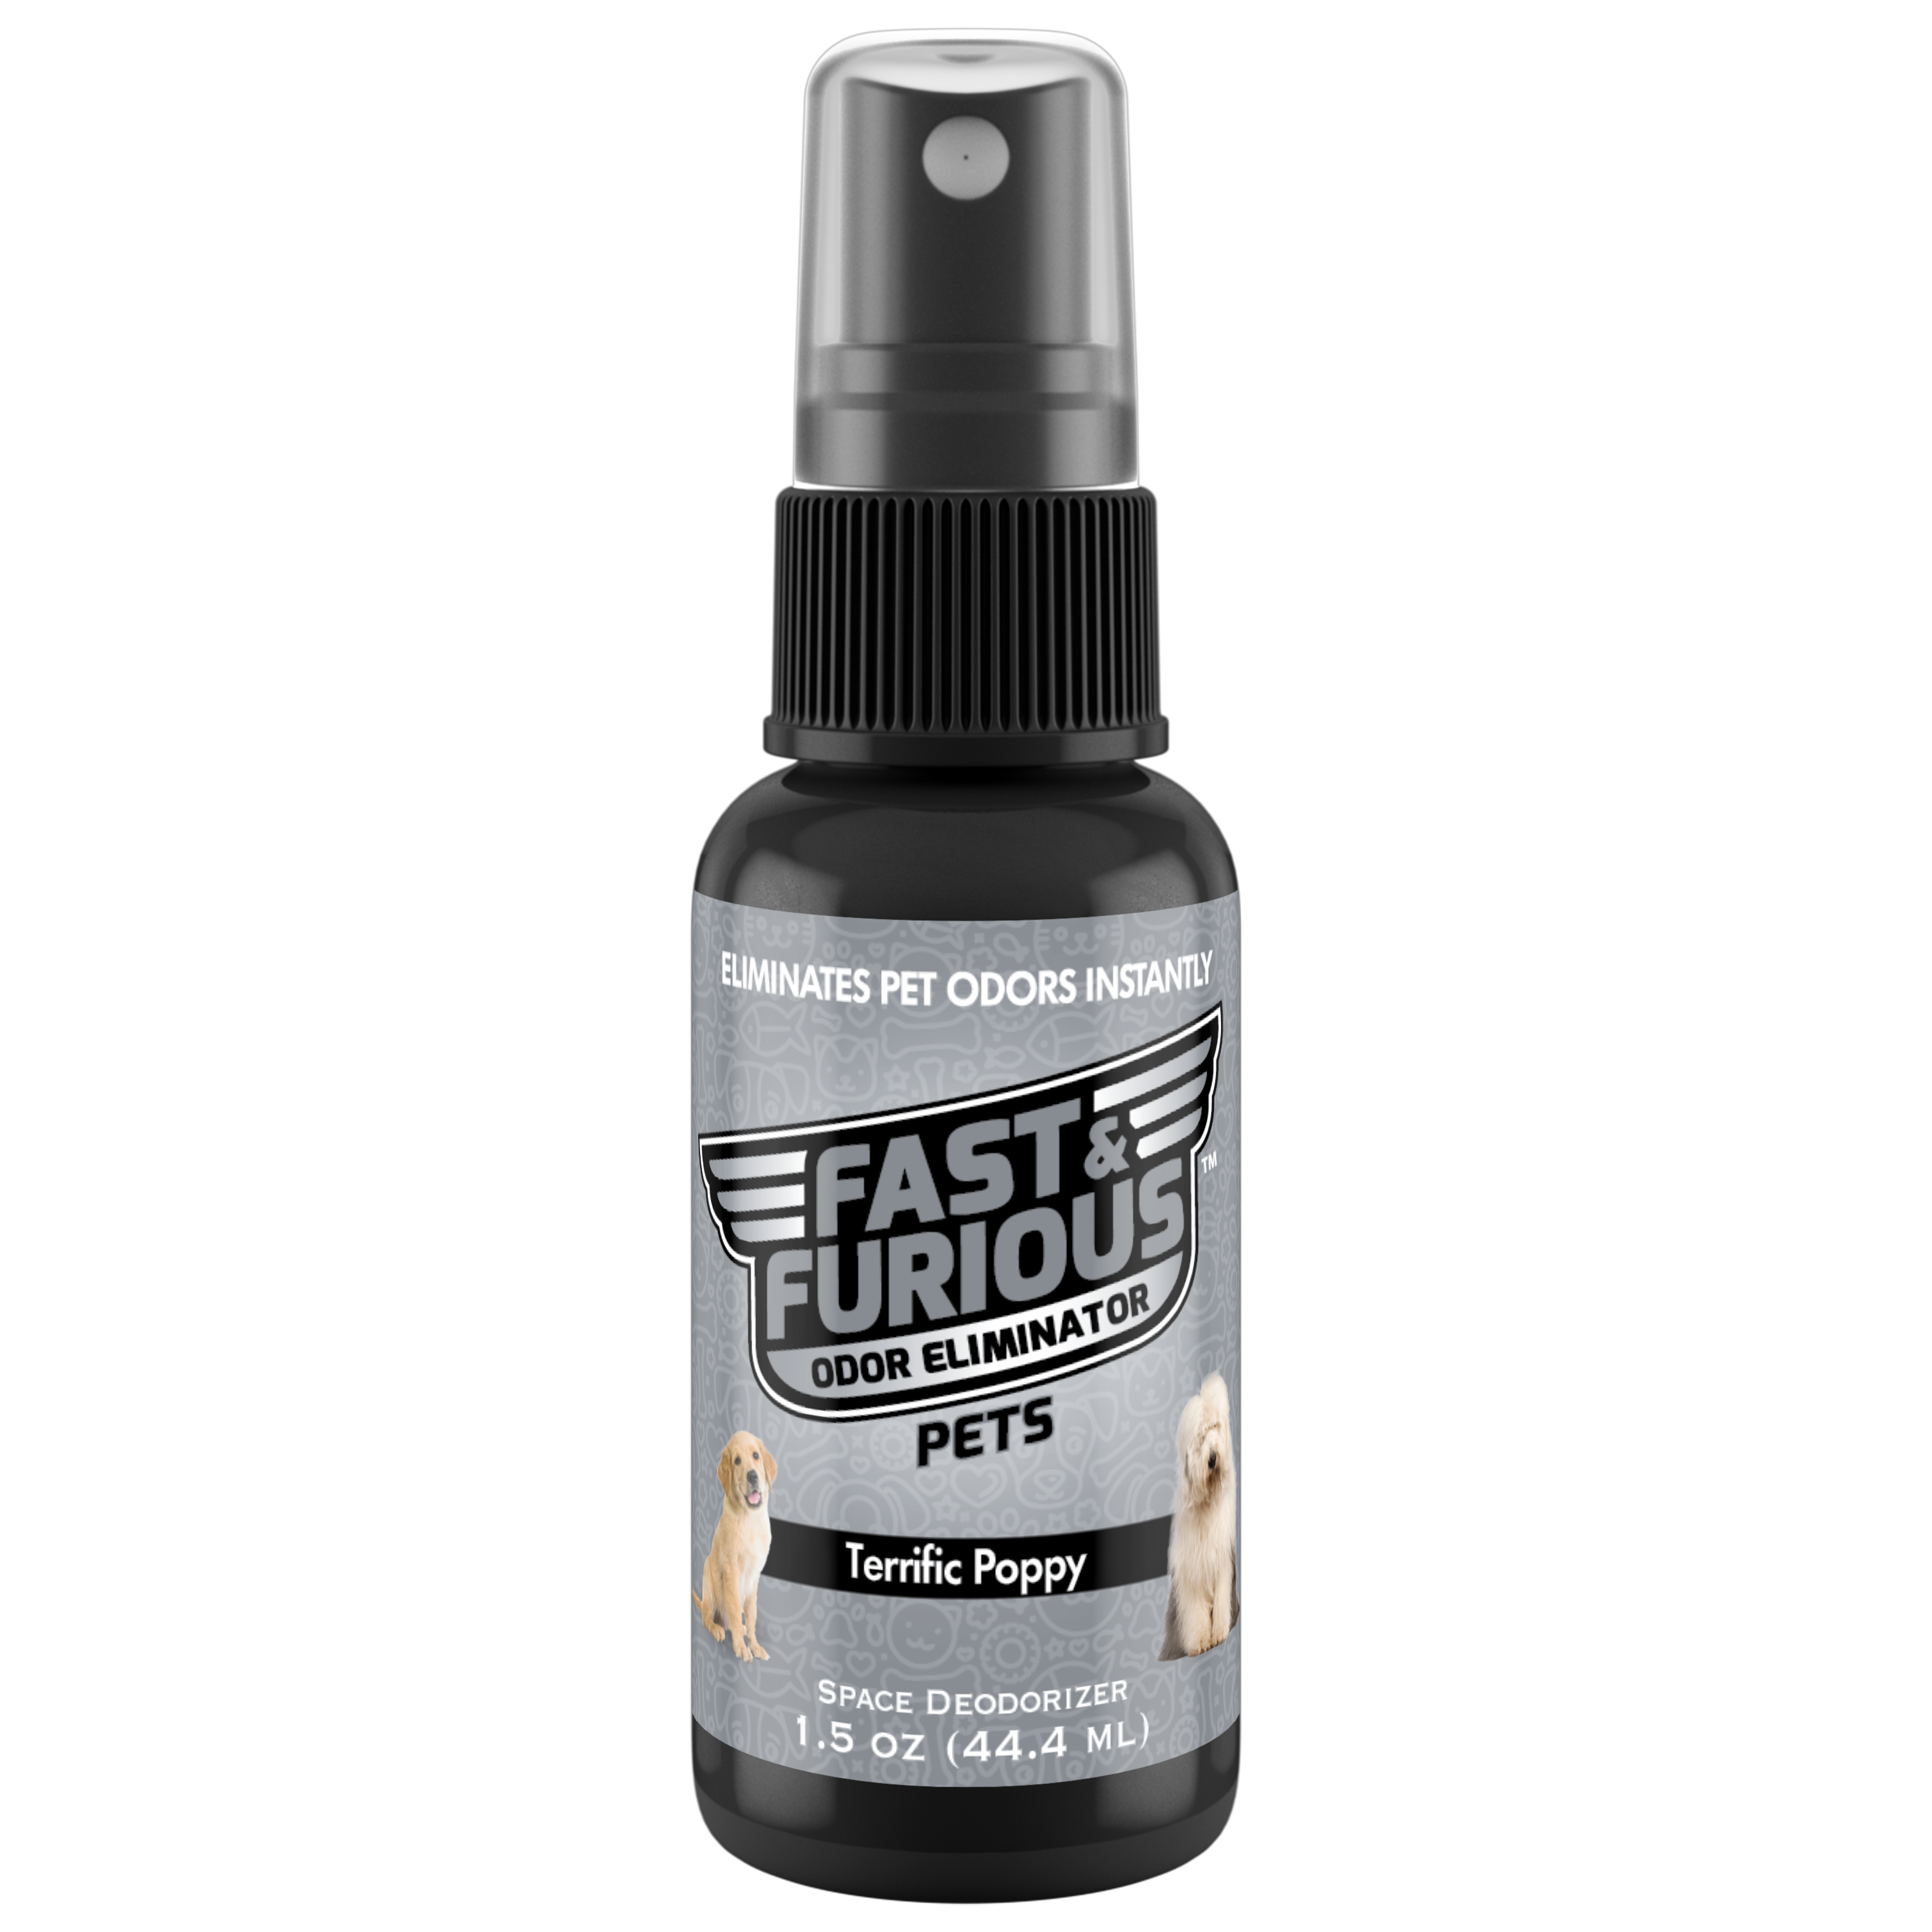 Fast and Furious Pets Odor Eliminator - Terrific Poppy Scent